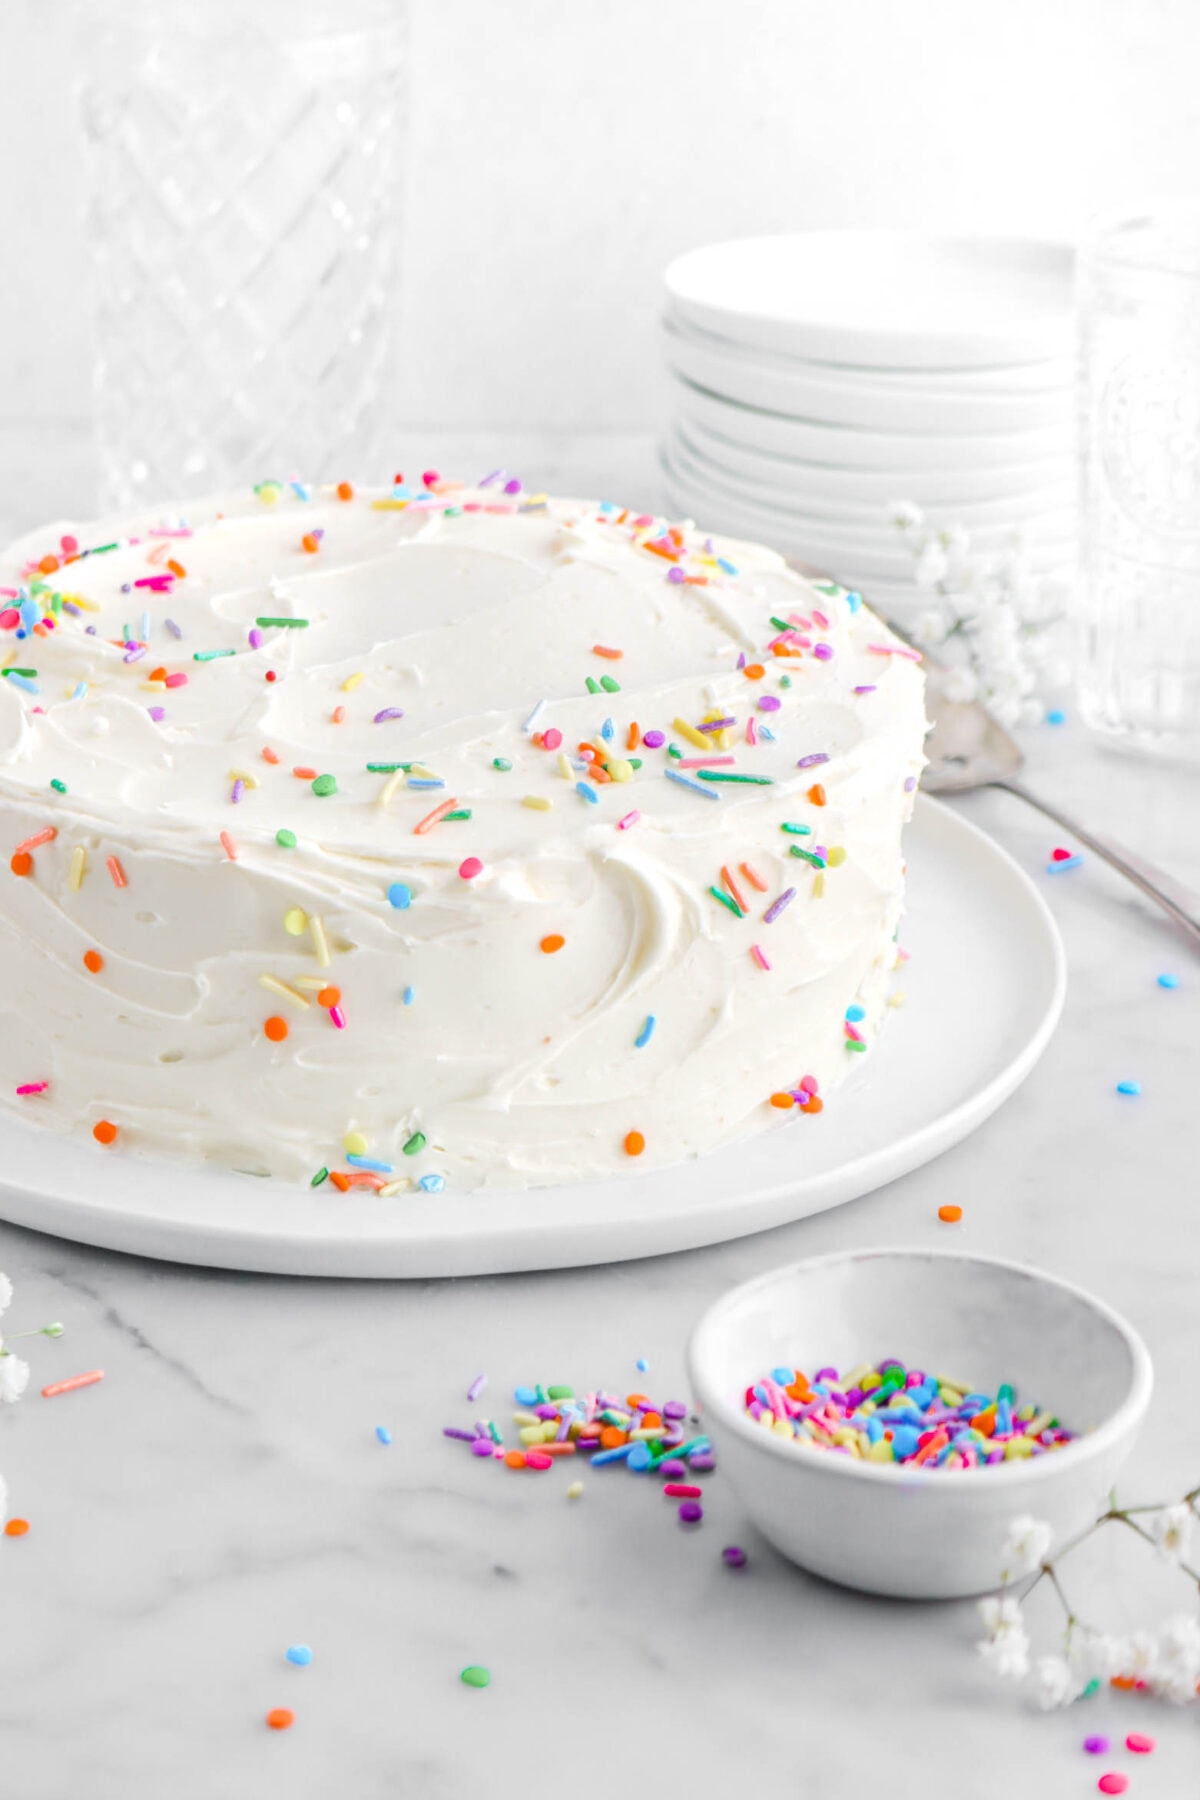 cropped close up of frosted cake with sprinkles on top and sides of cake, with bowl of sprinkles and white flowers around on marble surface.